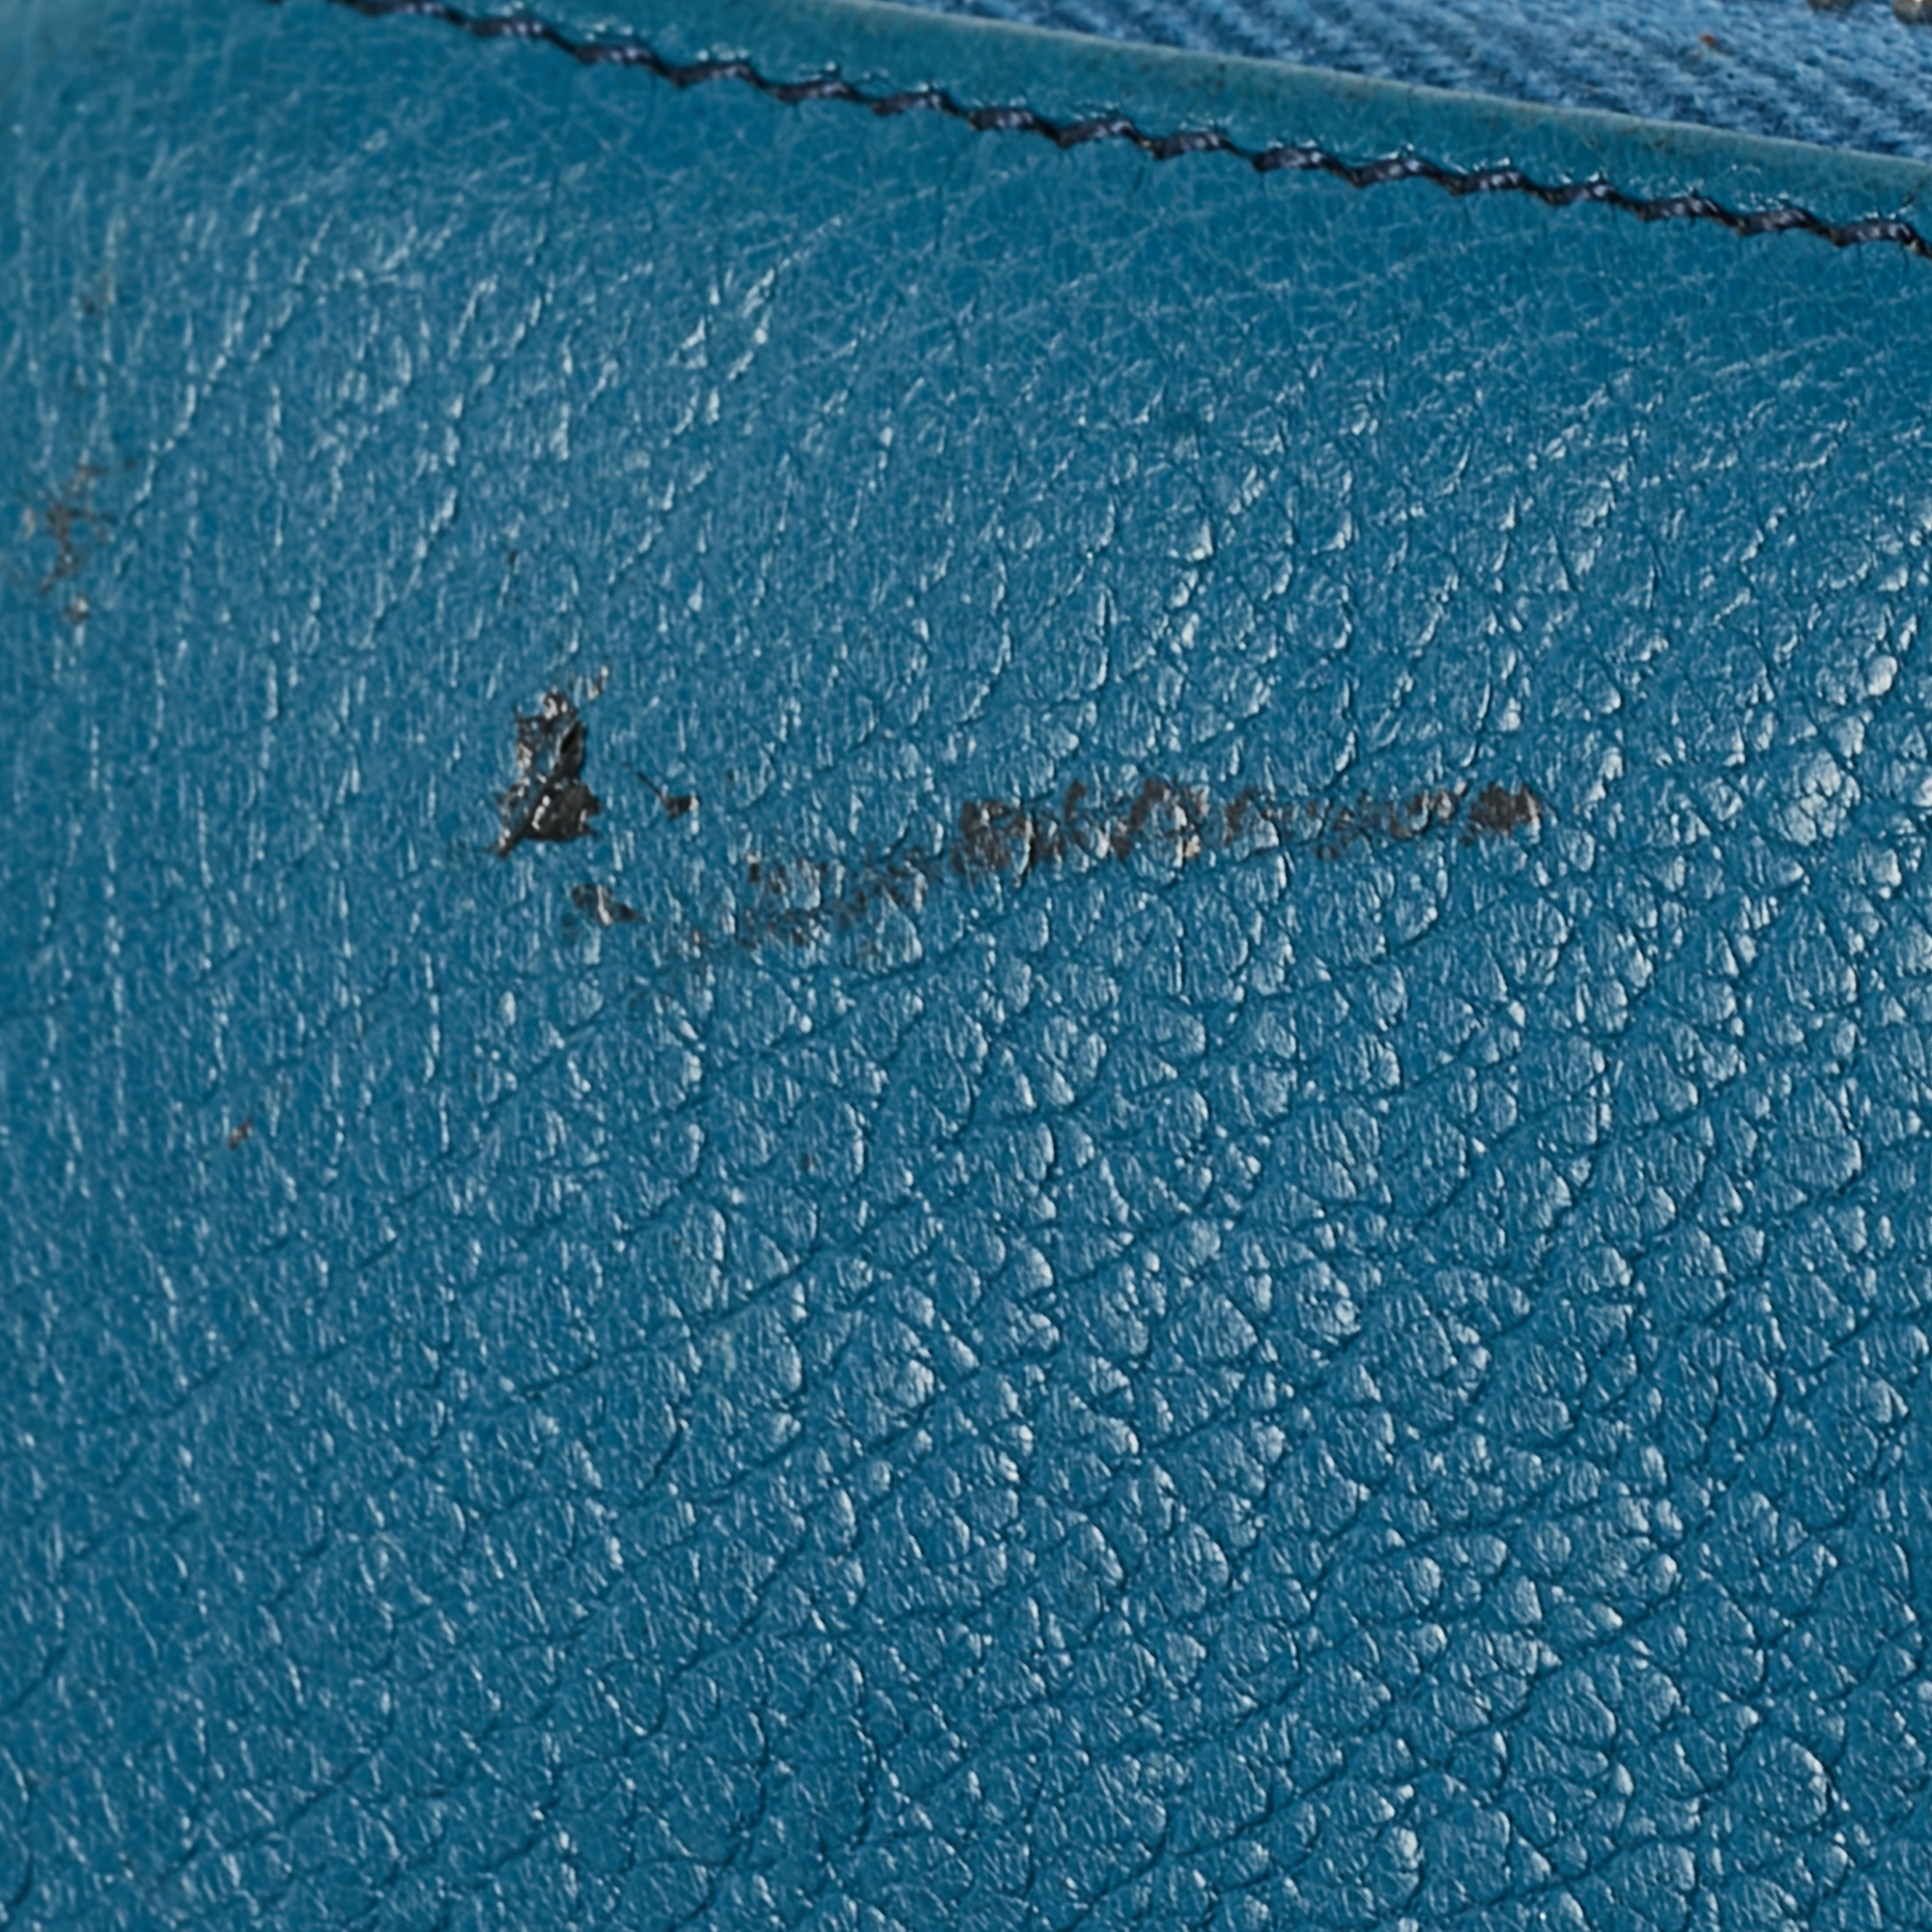 Givenchy Blue Leather Logo Zip Around Continental Wallet